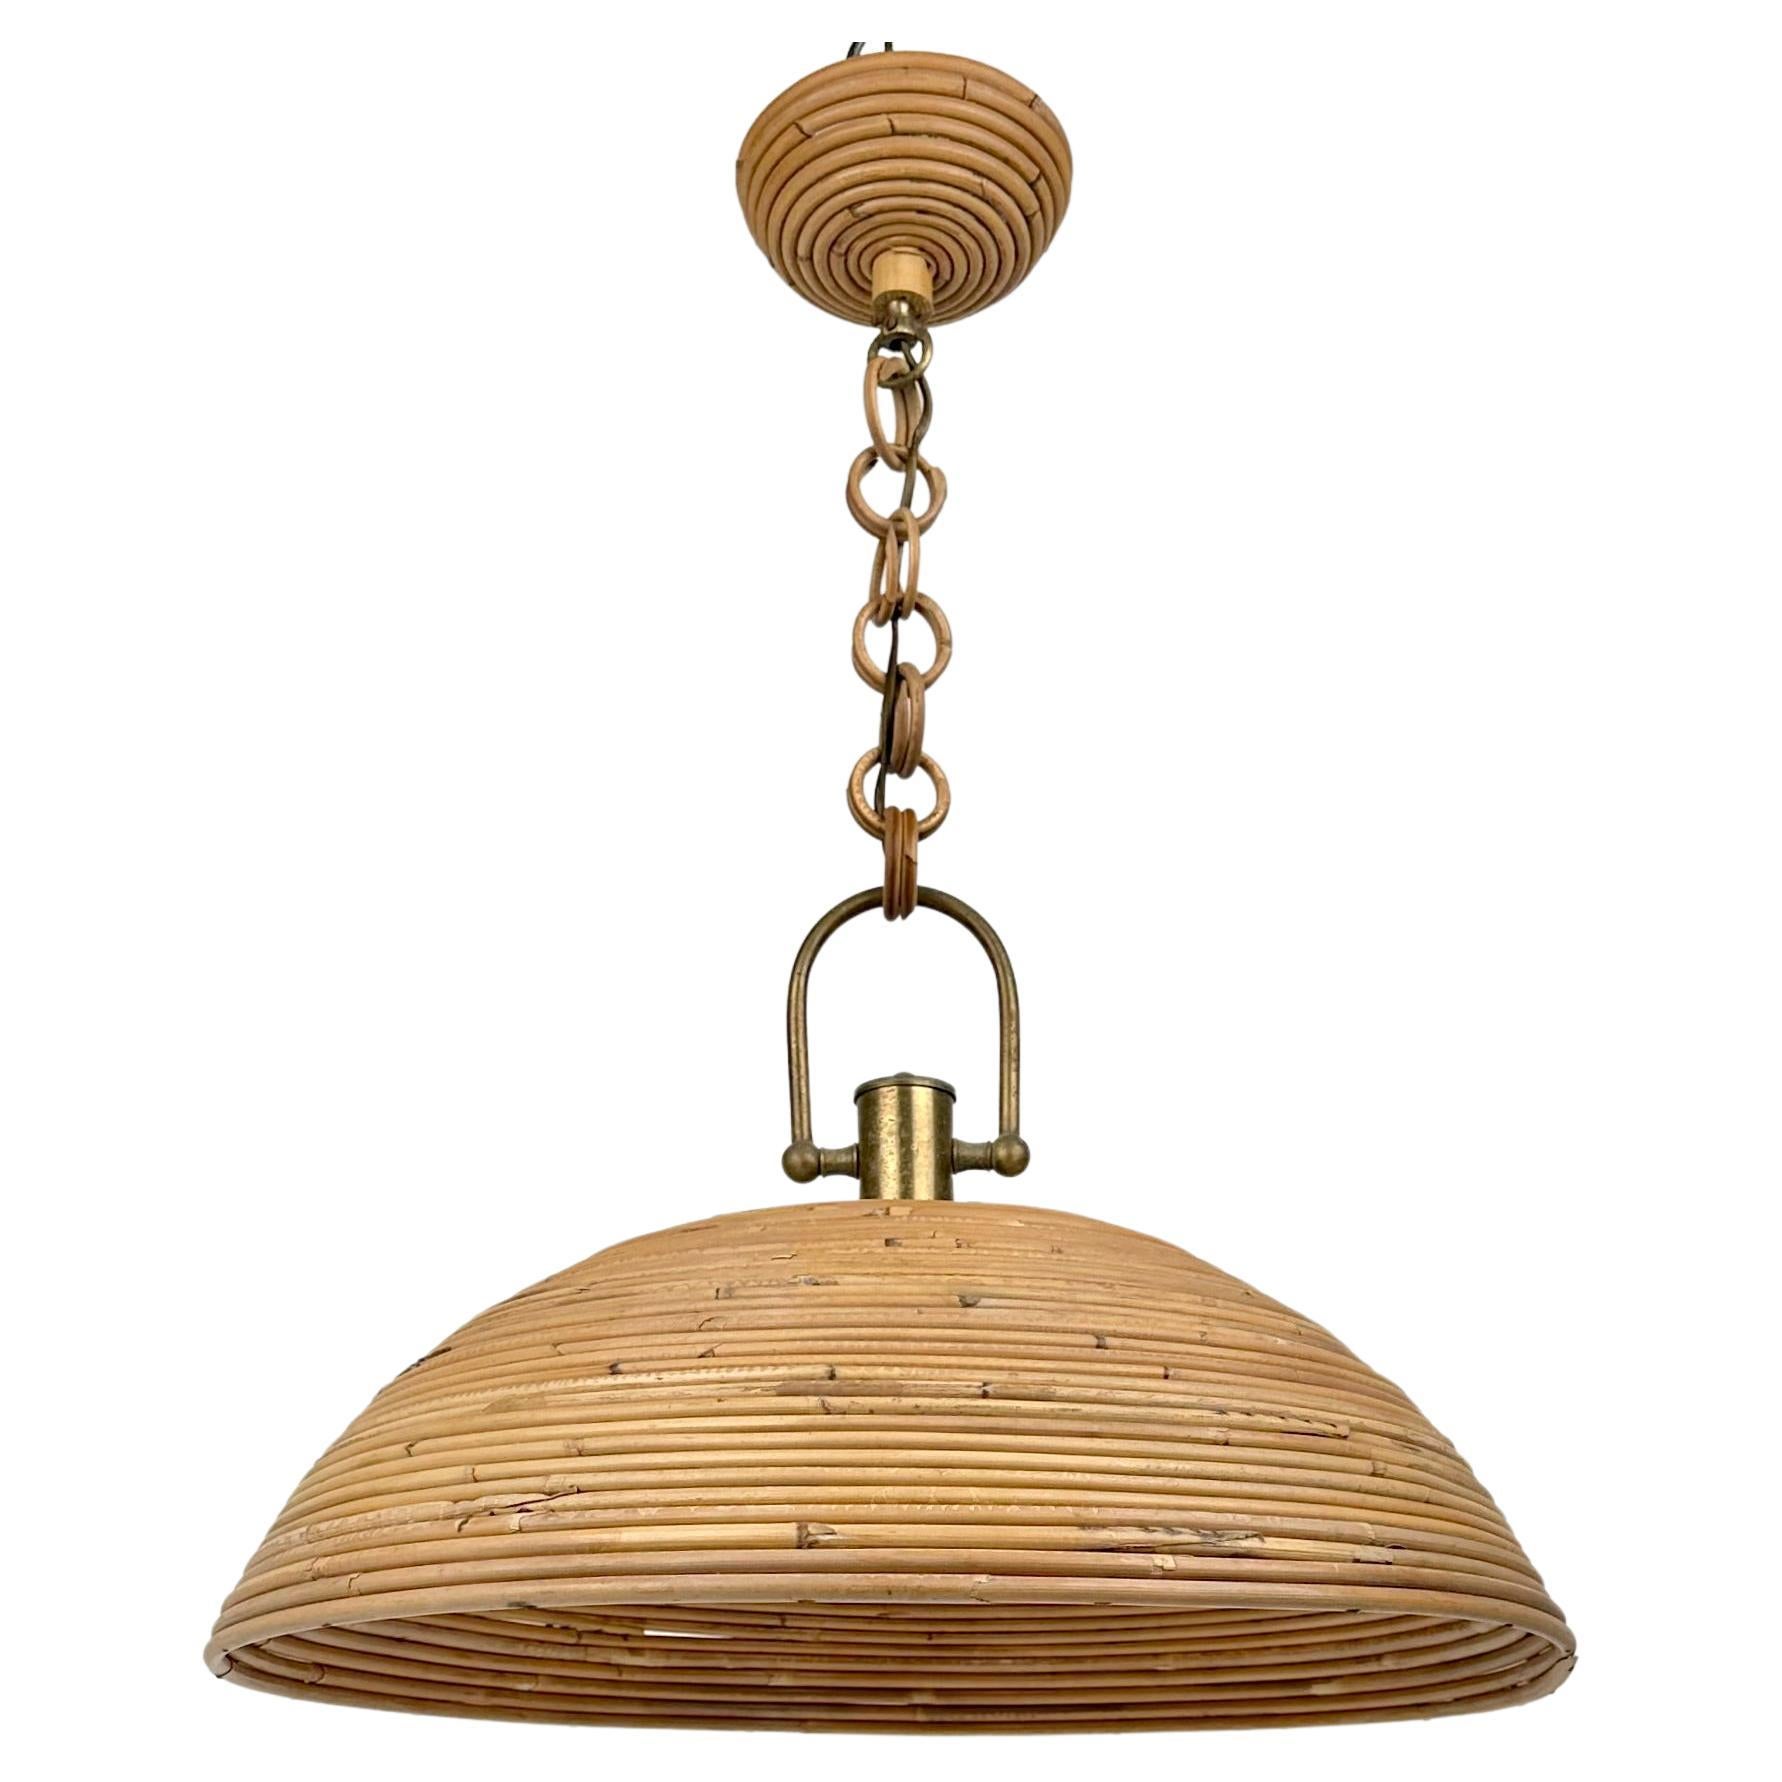 Pendant chandelier or suspension light in dome shaped rattan with brass details attributed to Vivai del Sud. 

Made in Italy in the 1960s in the style of the Fungo model from the Rising Sun collection by the Italian designer Gabriella Crespi.